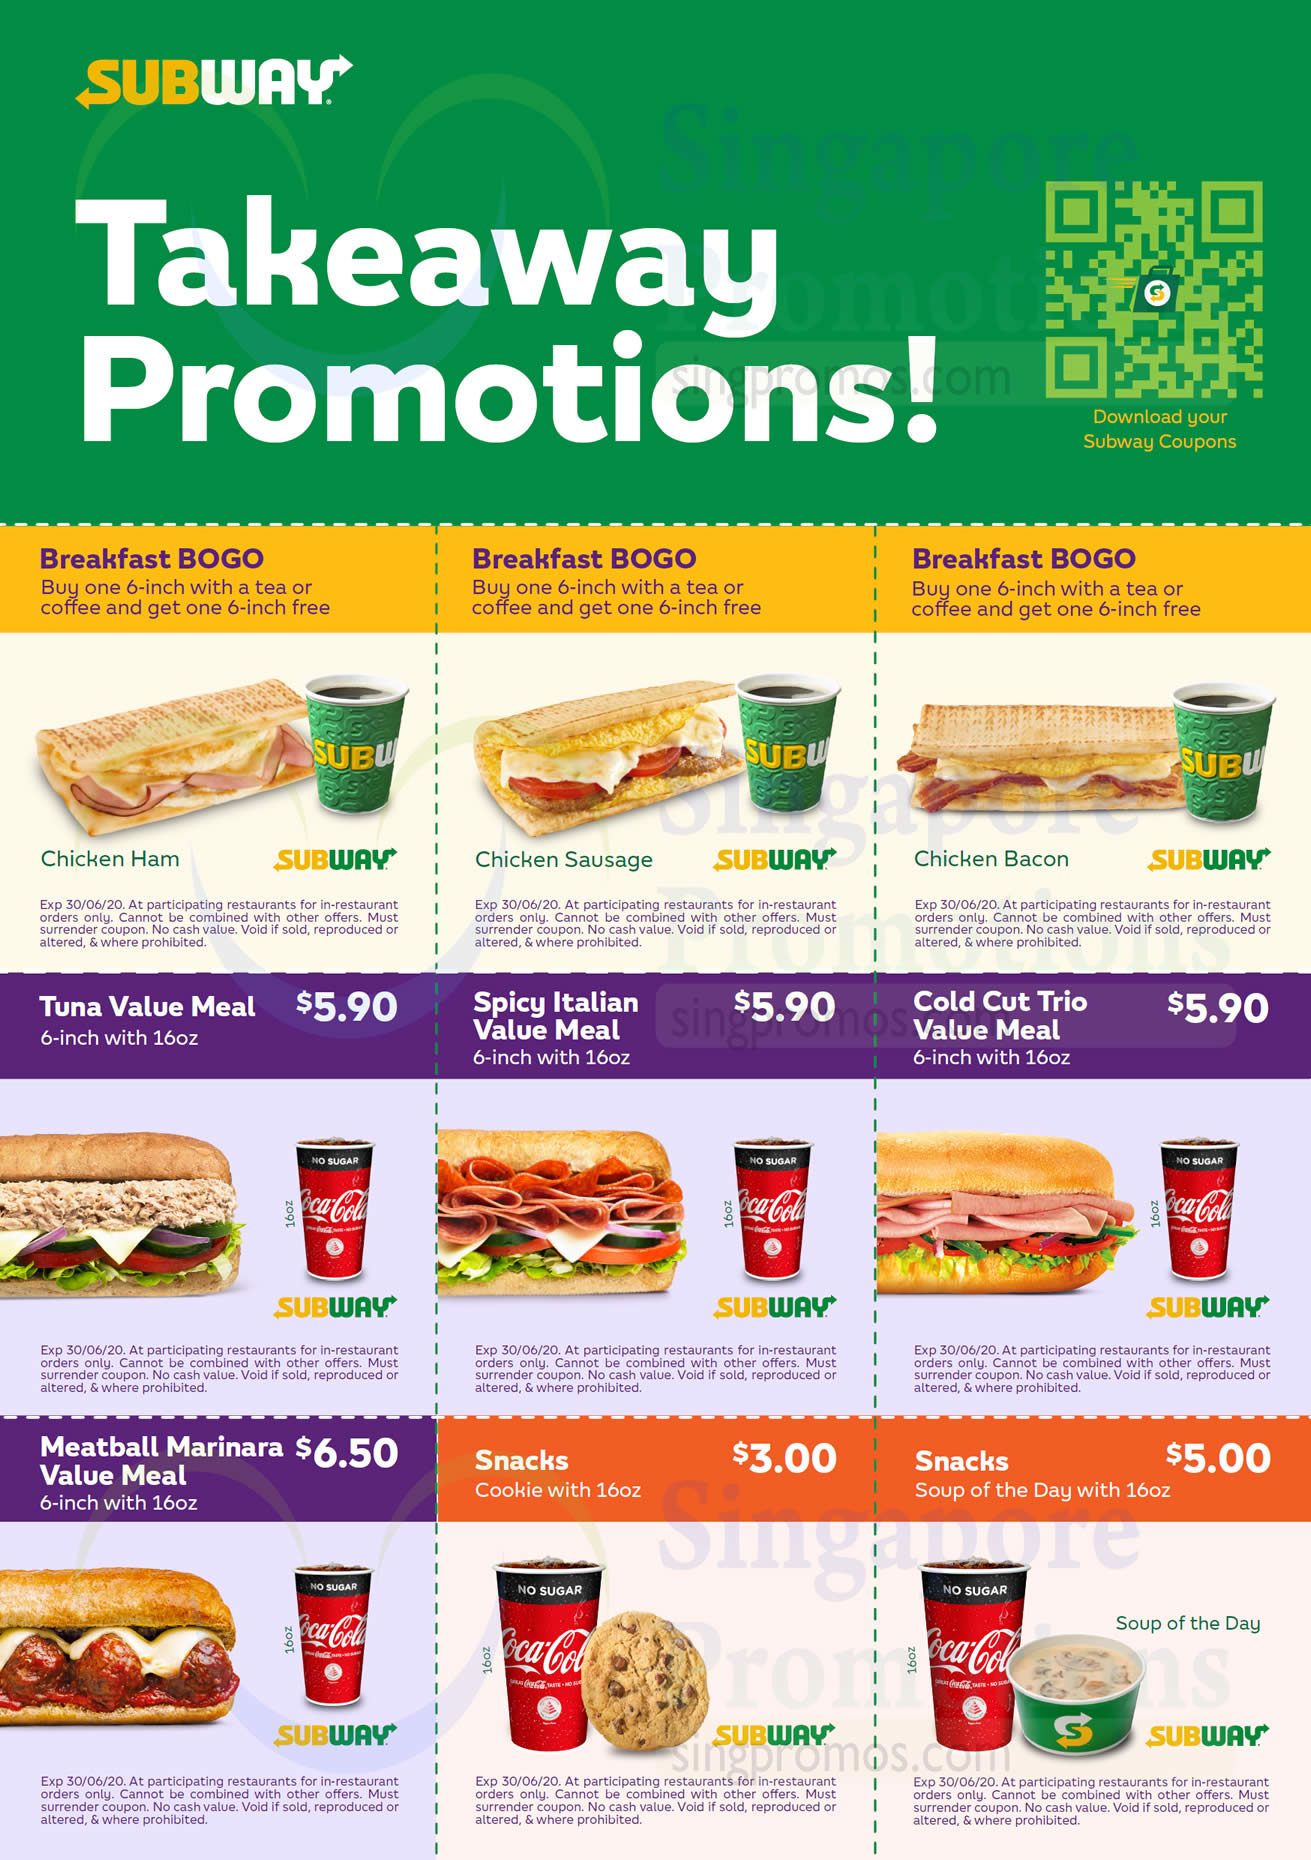 subway-extends-their-takeaway-coupon-deals-including-the-1-for-1-breakfast-sub-offer-till-30